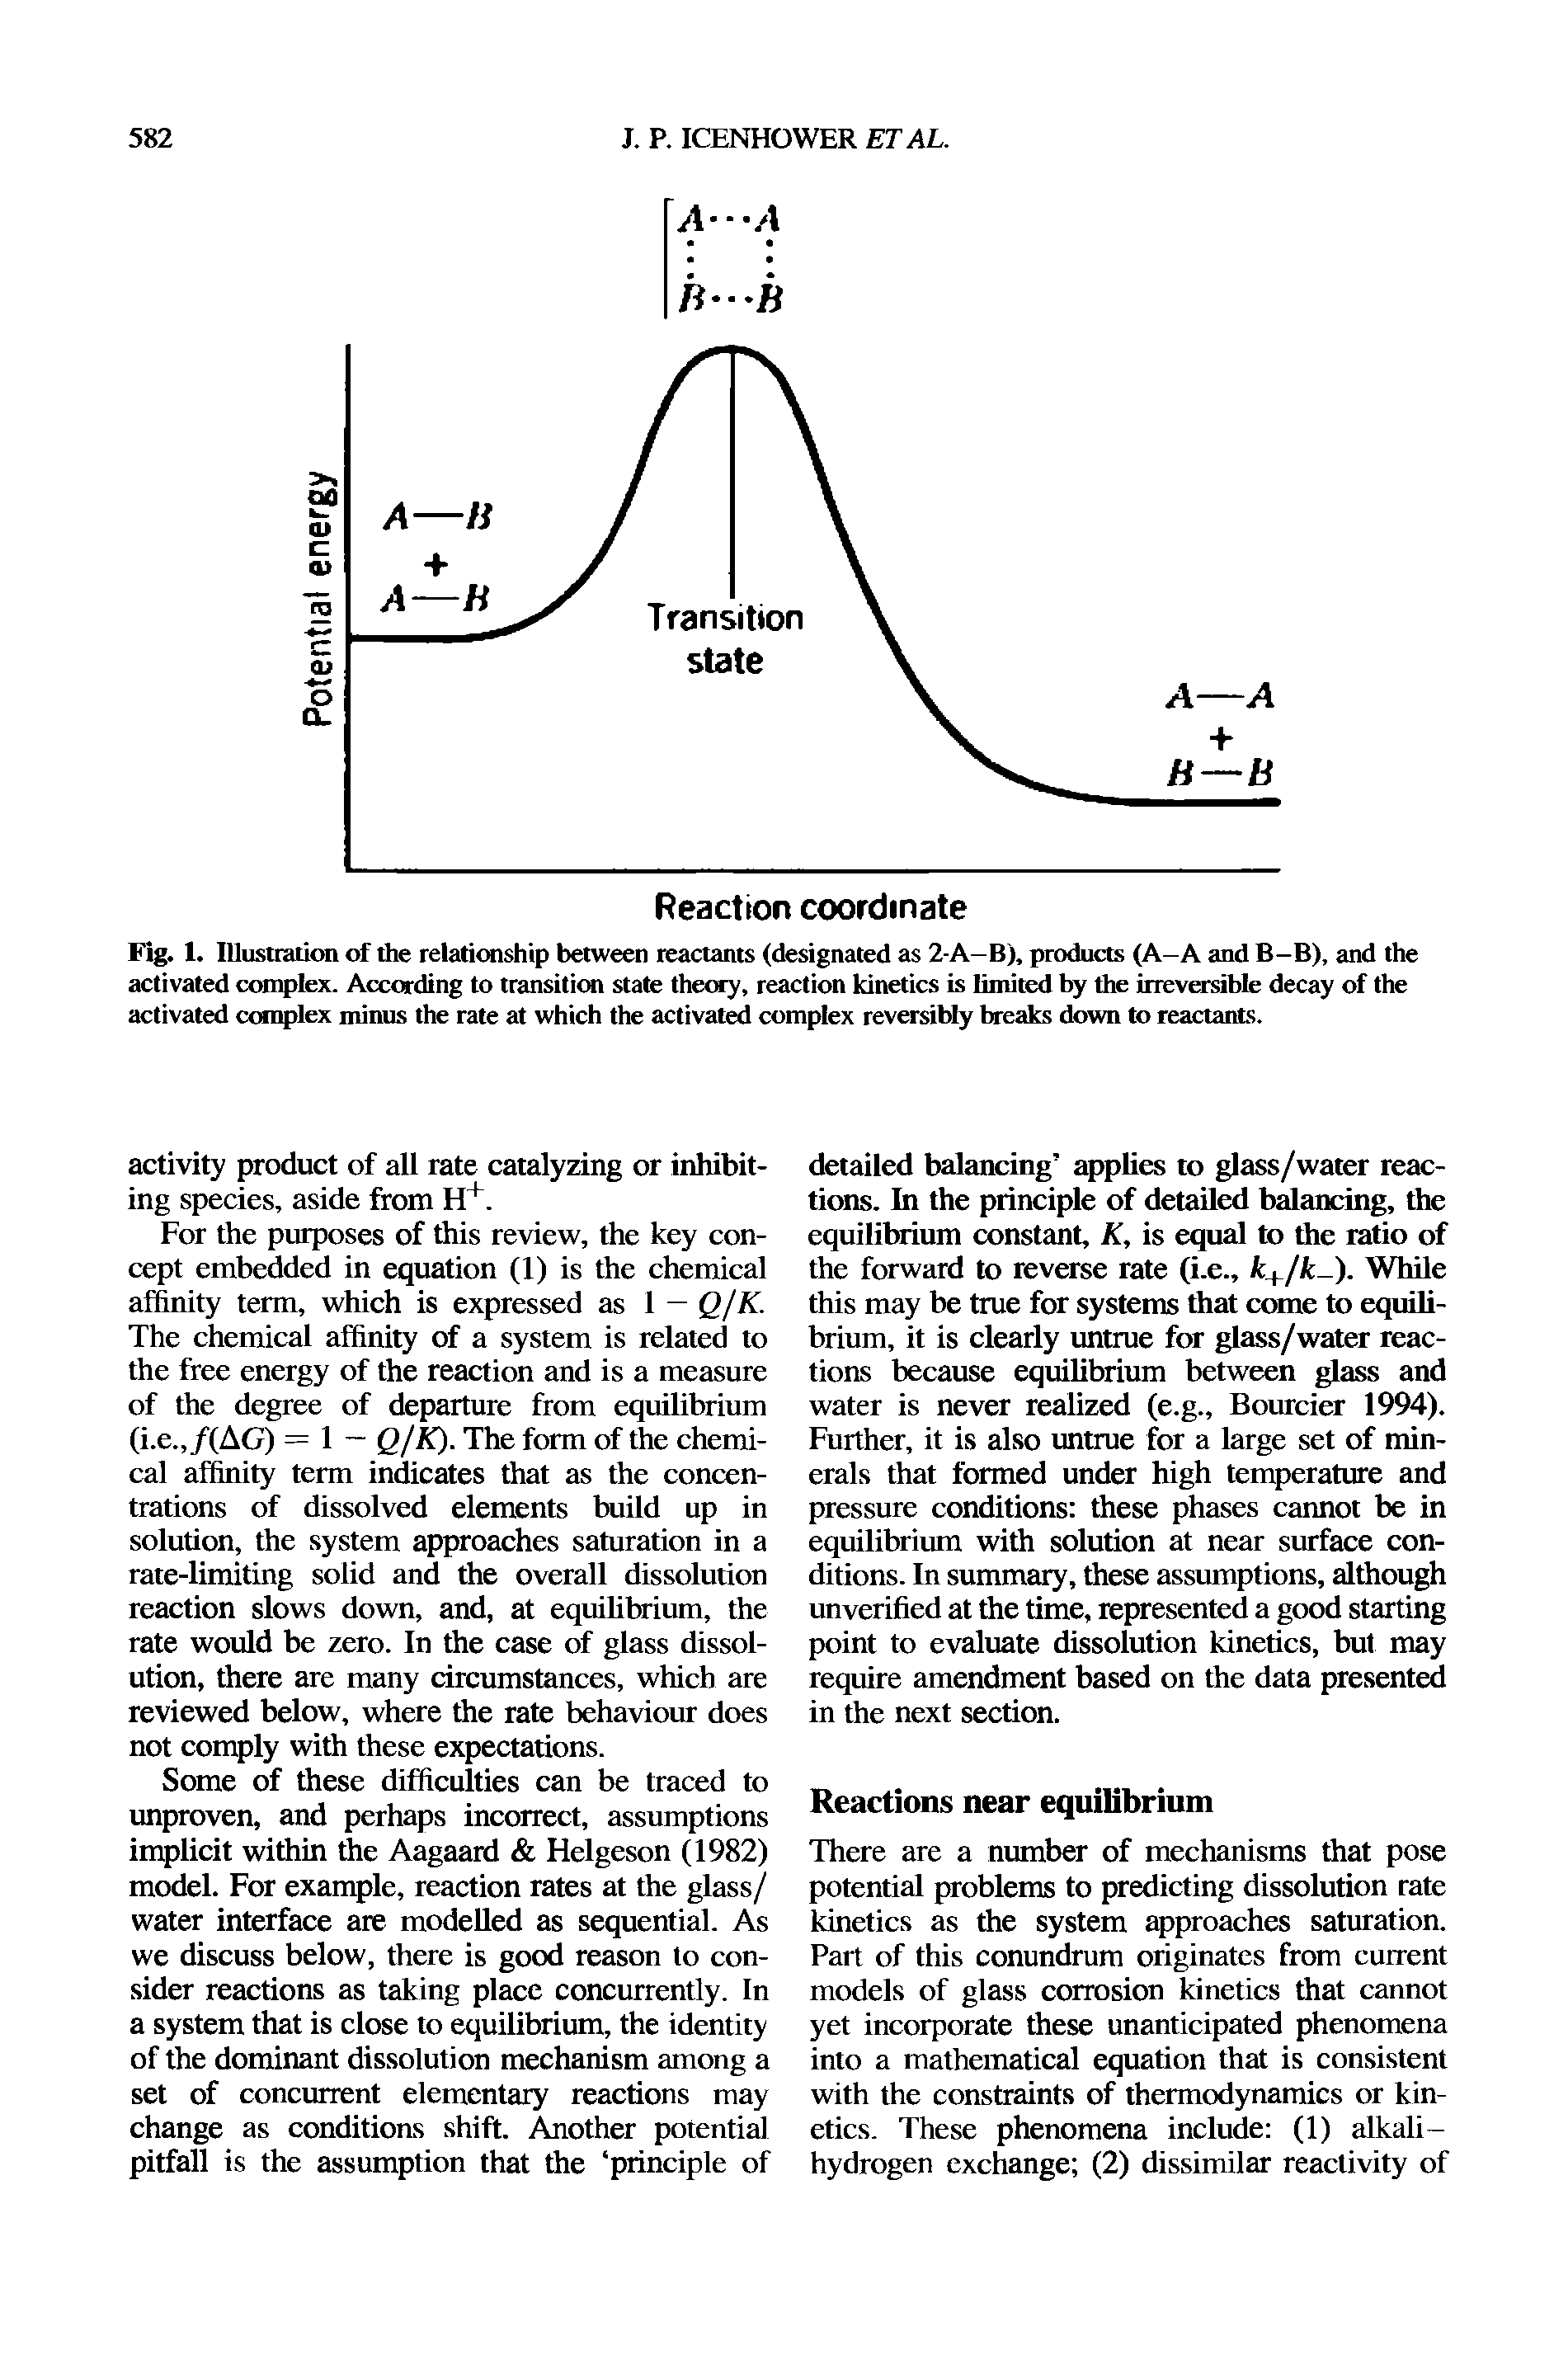 Fig. I. Illustration of the relationship between reactants (designated as 2-A-B), products (A-A and B-B), and the activated complex. According to transition state theory, reaction kinetics is limited by the irreversible decay of the activated complex minus the rate at which the activated complex reversibly breaks down to reactants.